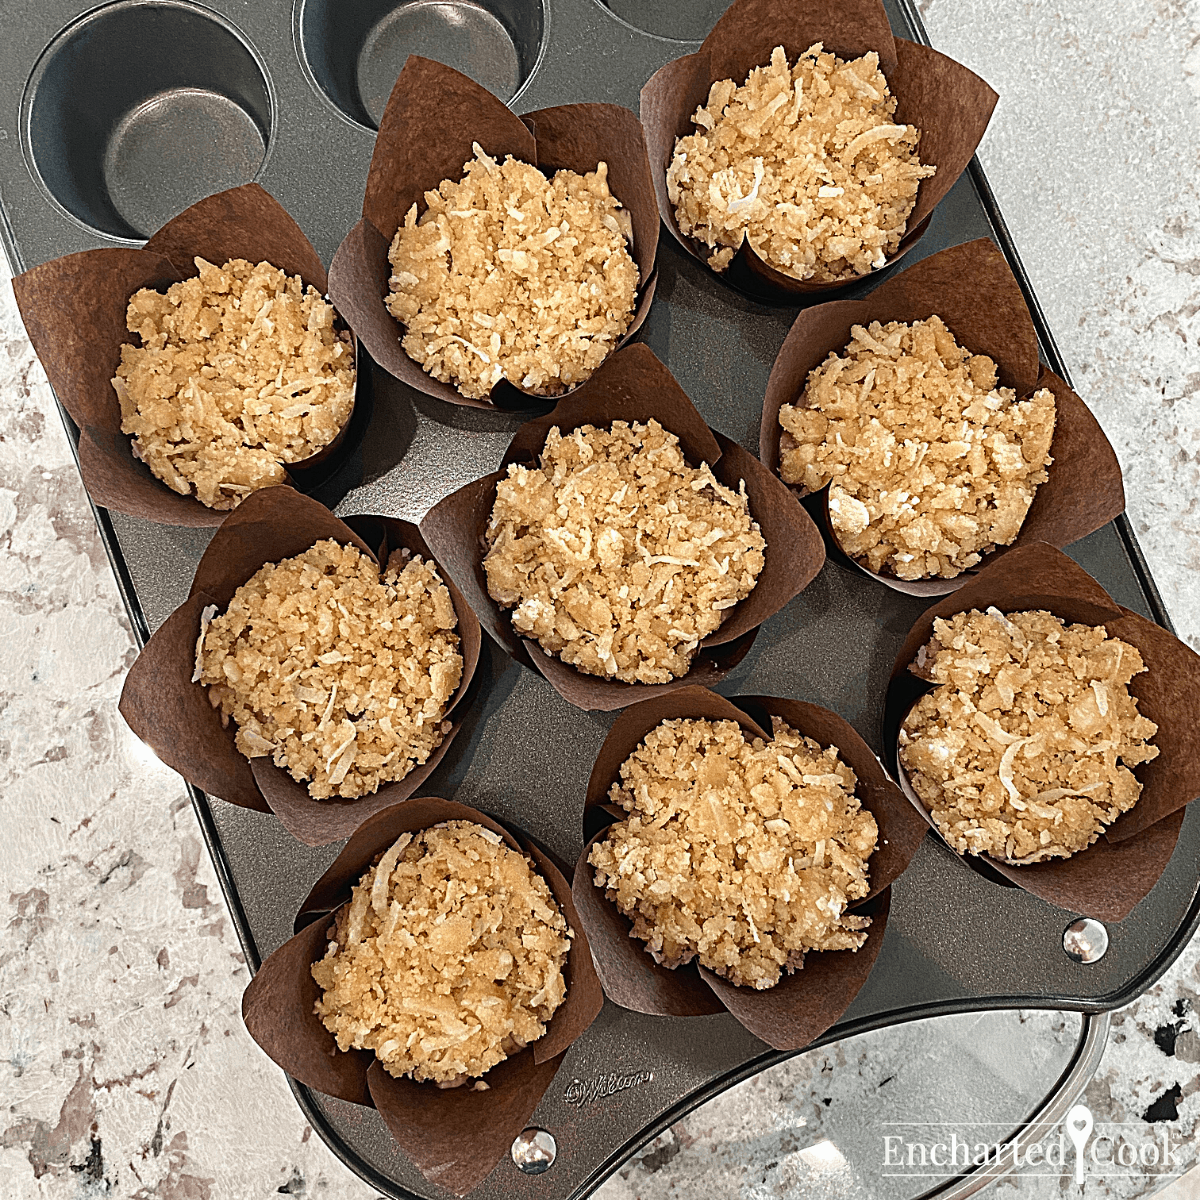 The muffins are ready for the oven. Each muffin cup is filled with the banana chocolate chip batter and each muffin is topped with the coconut crumb topping.